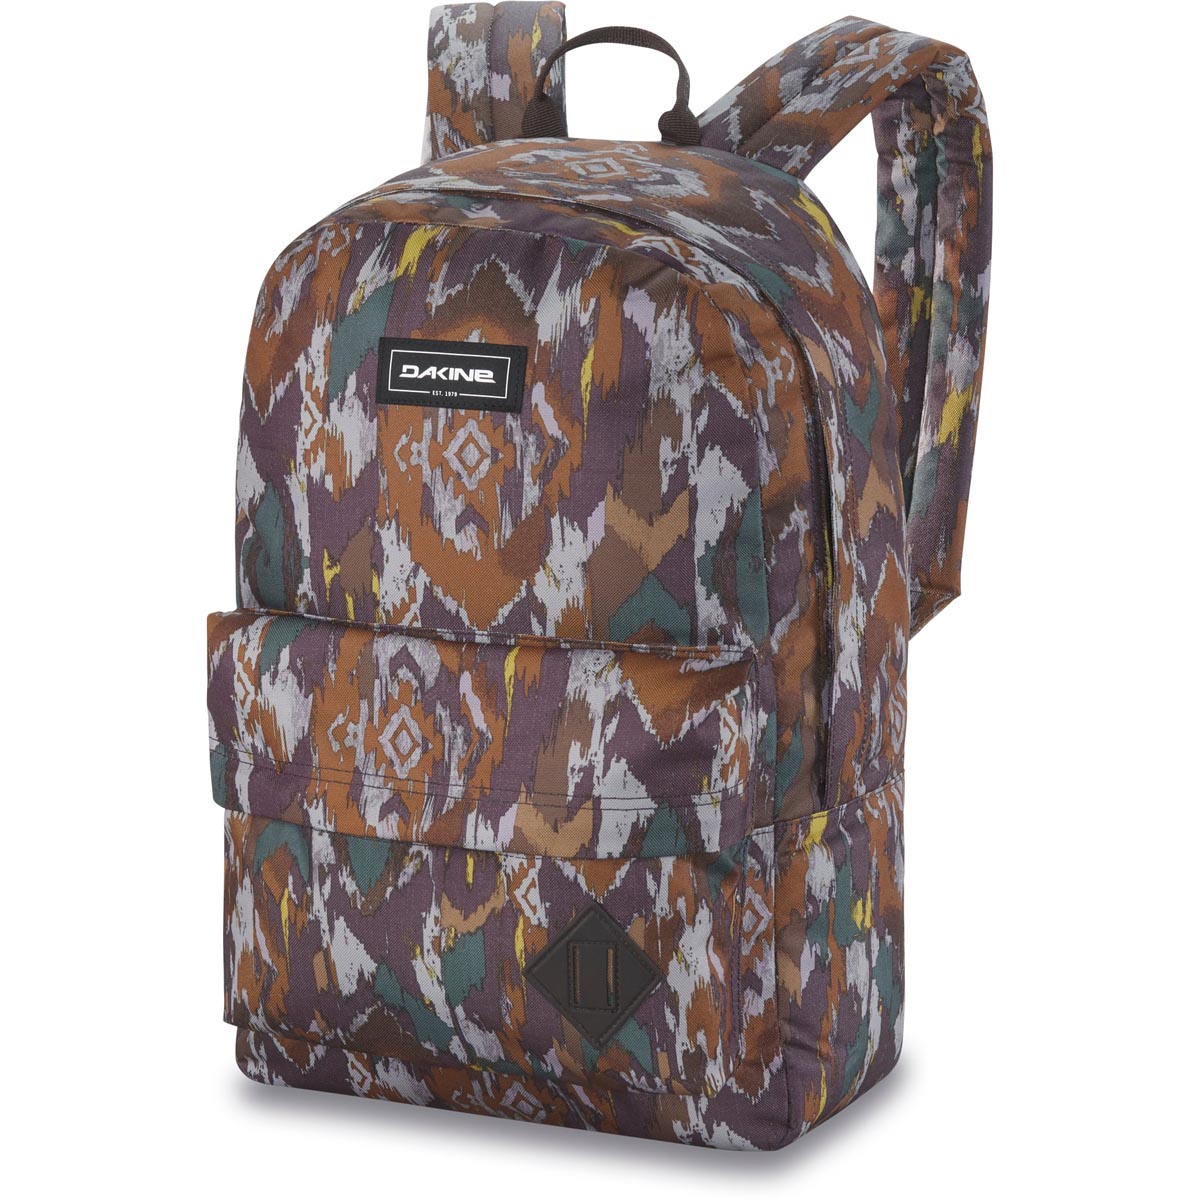 Dakine 365 Pack 21l Backpack - Painted Canyon image 1